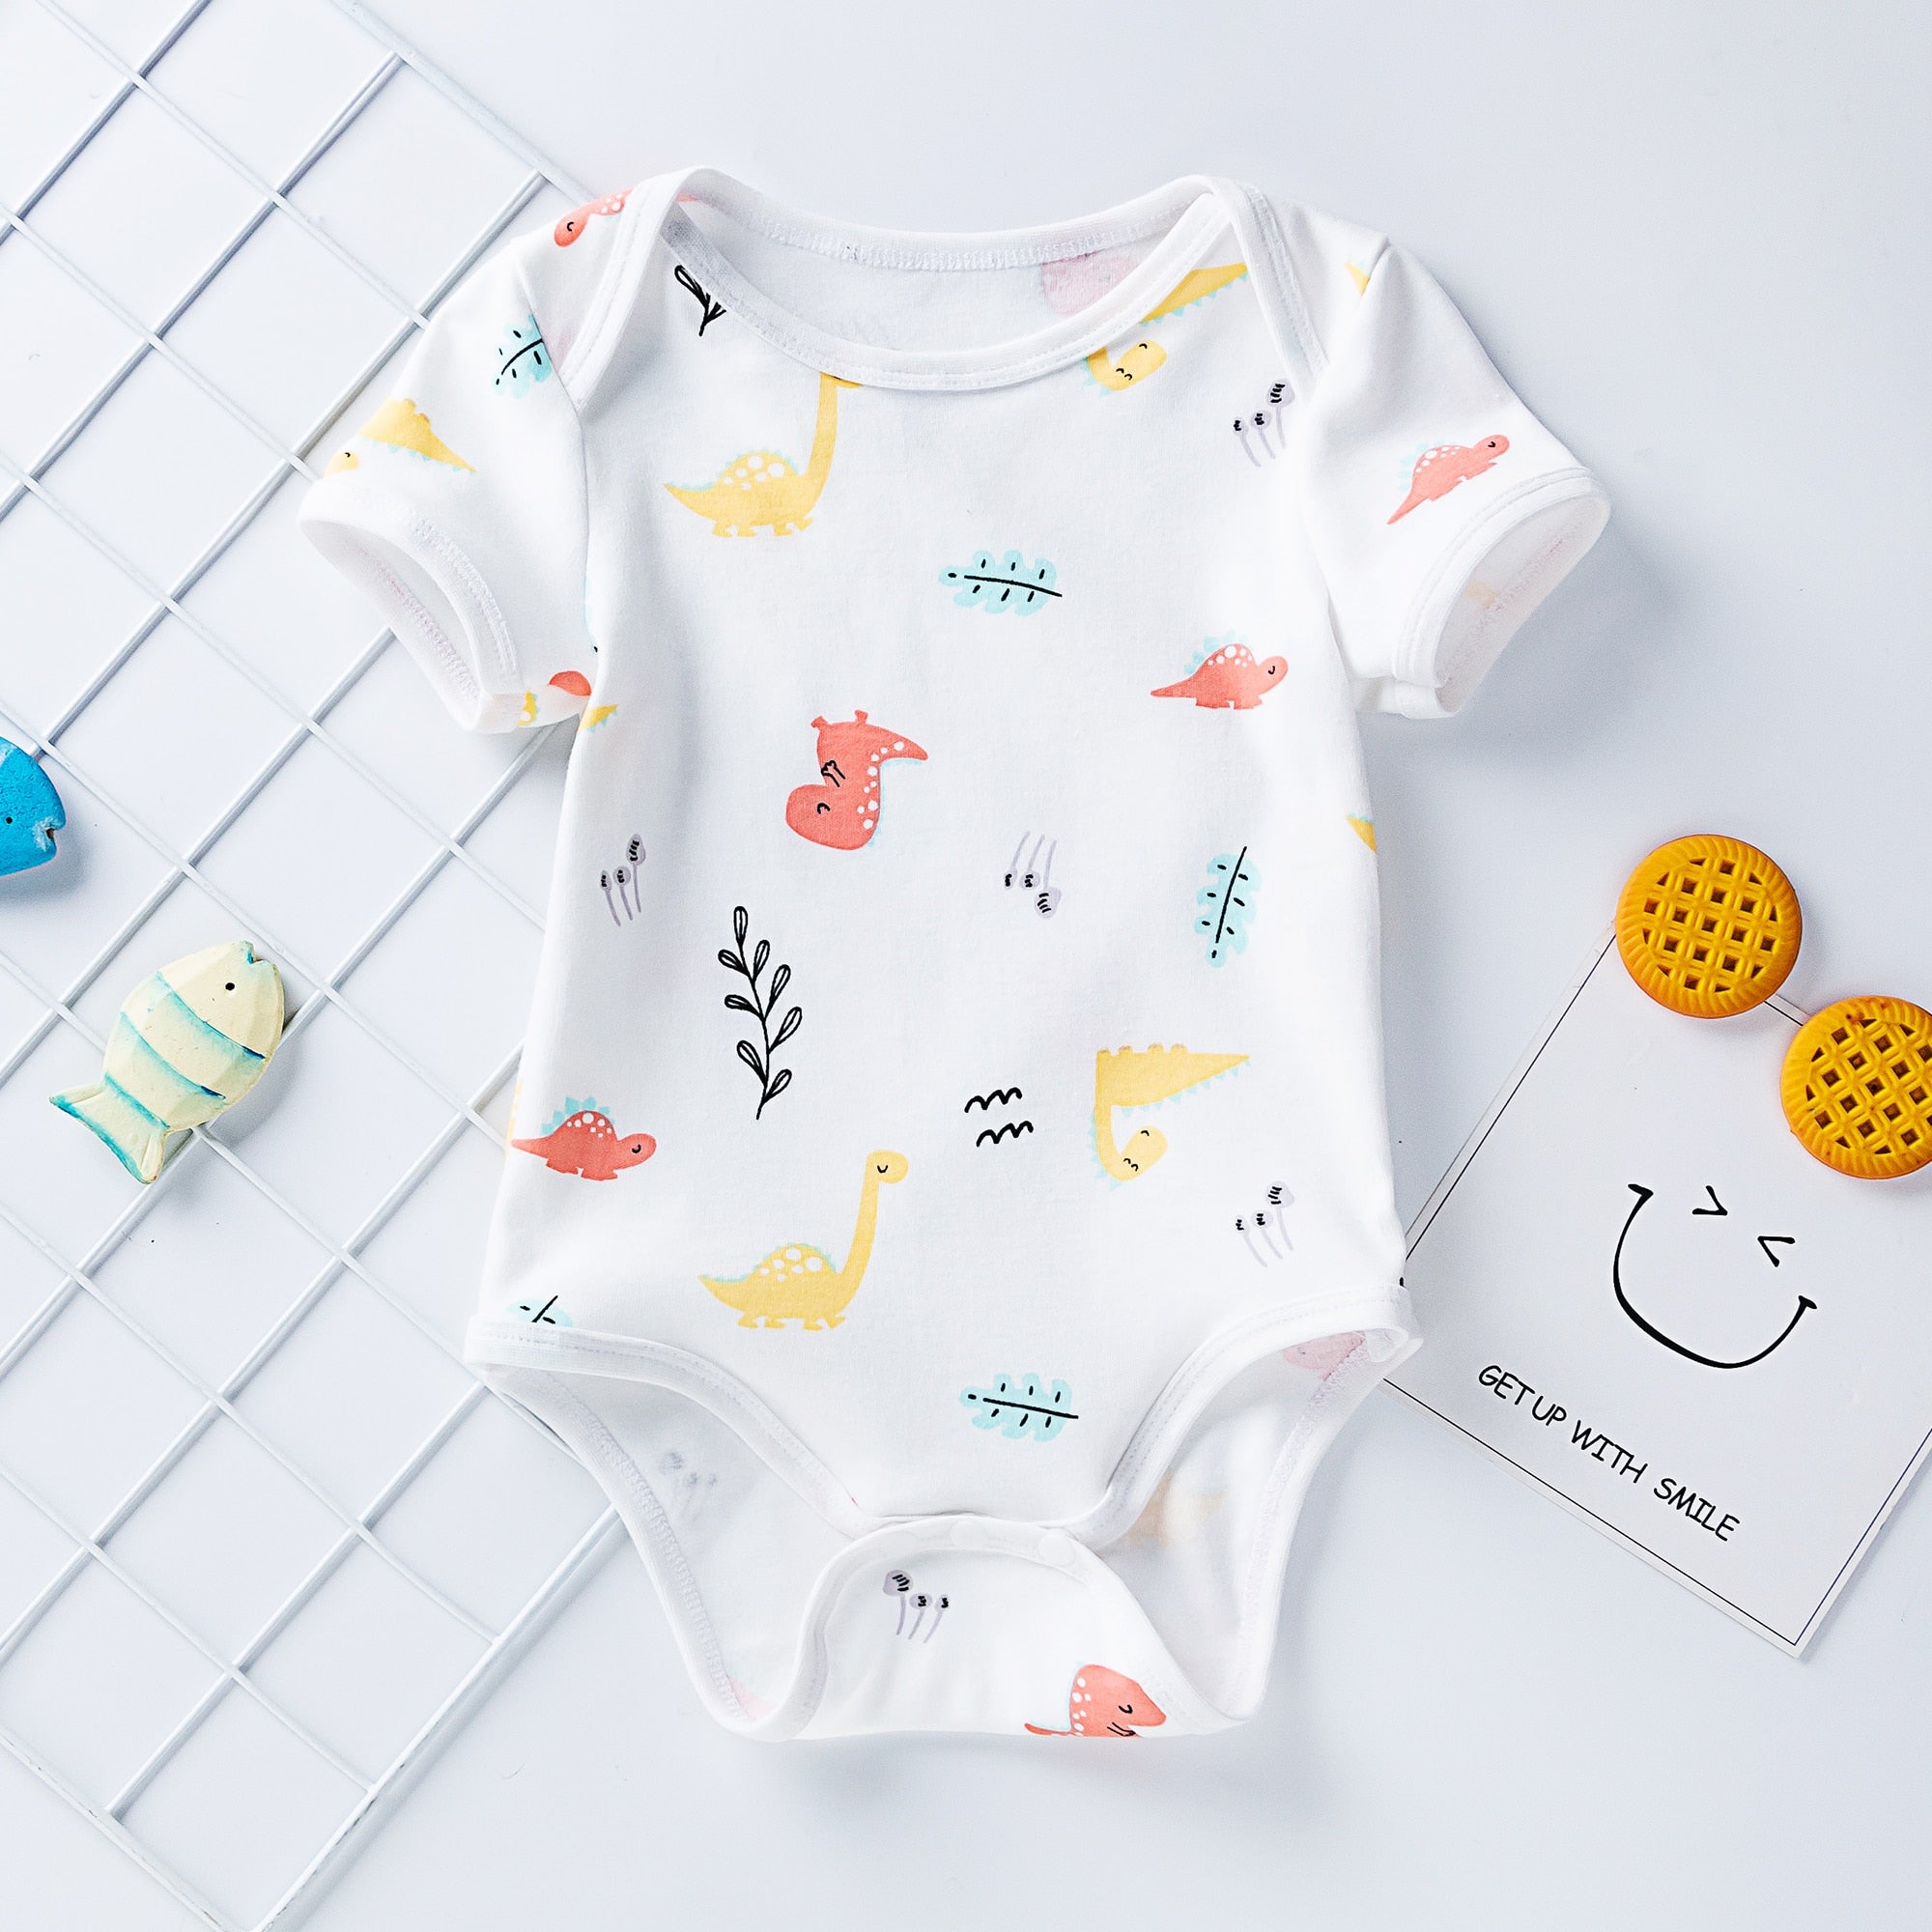 Cute Unisex Baby Romper with Fun Prints and Soft Cotton Fabric